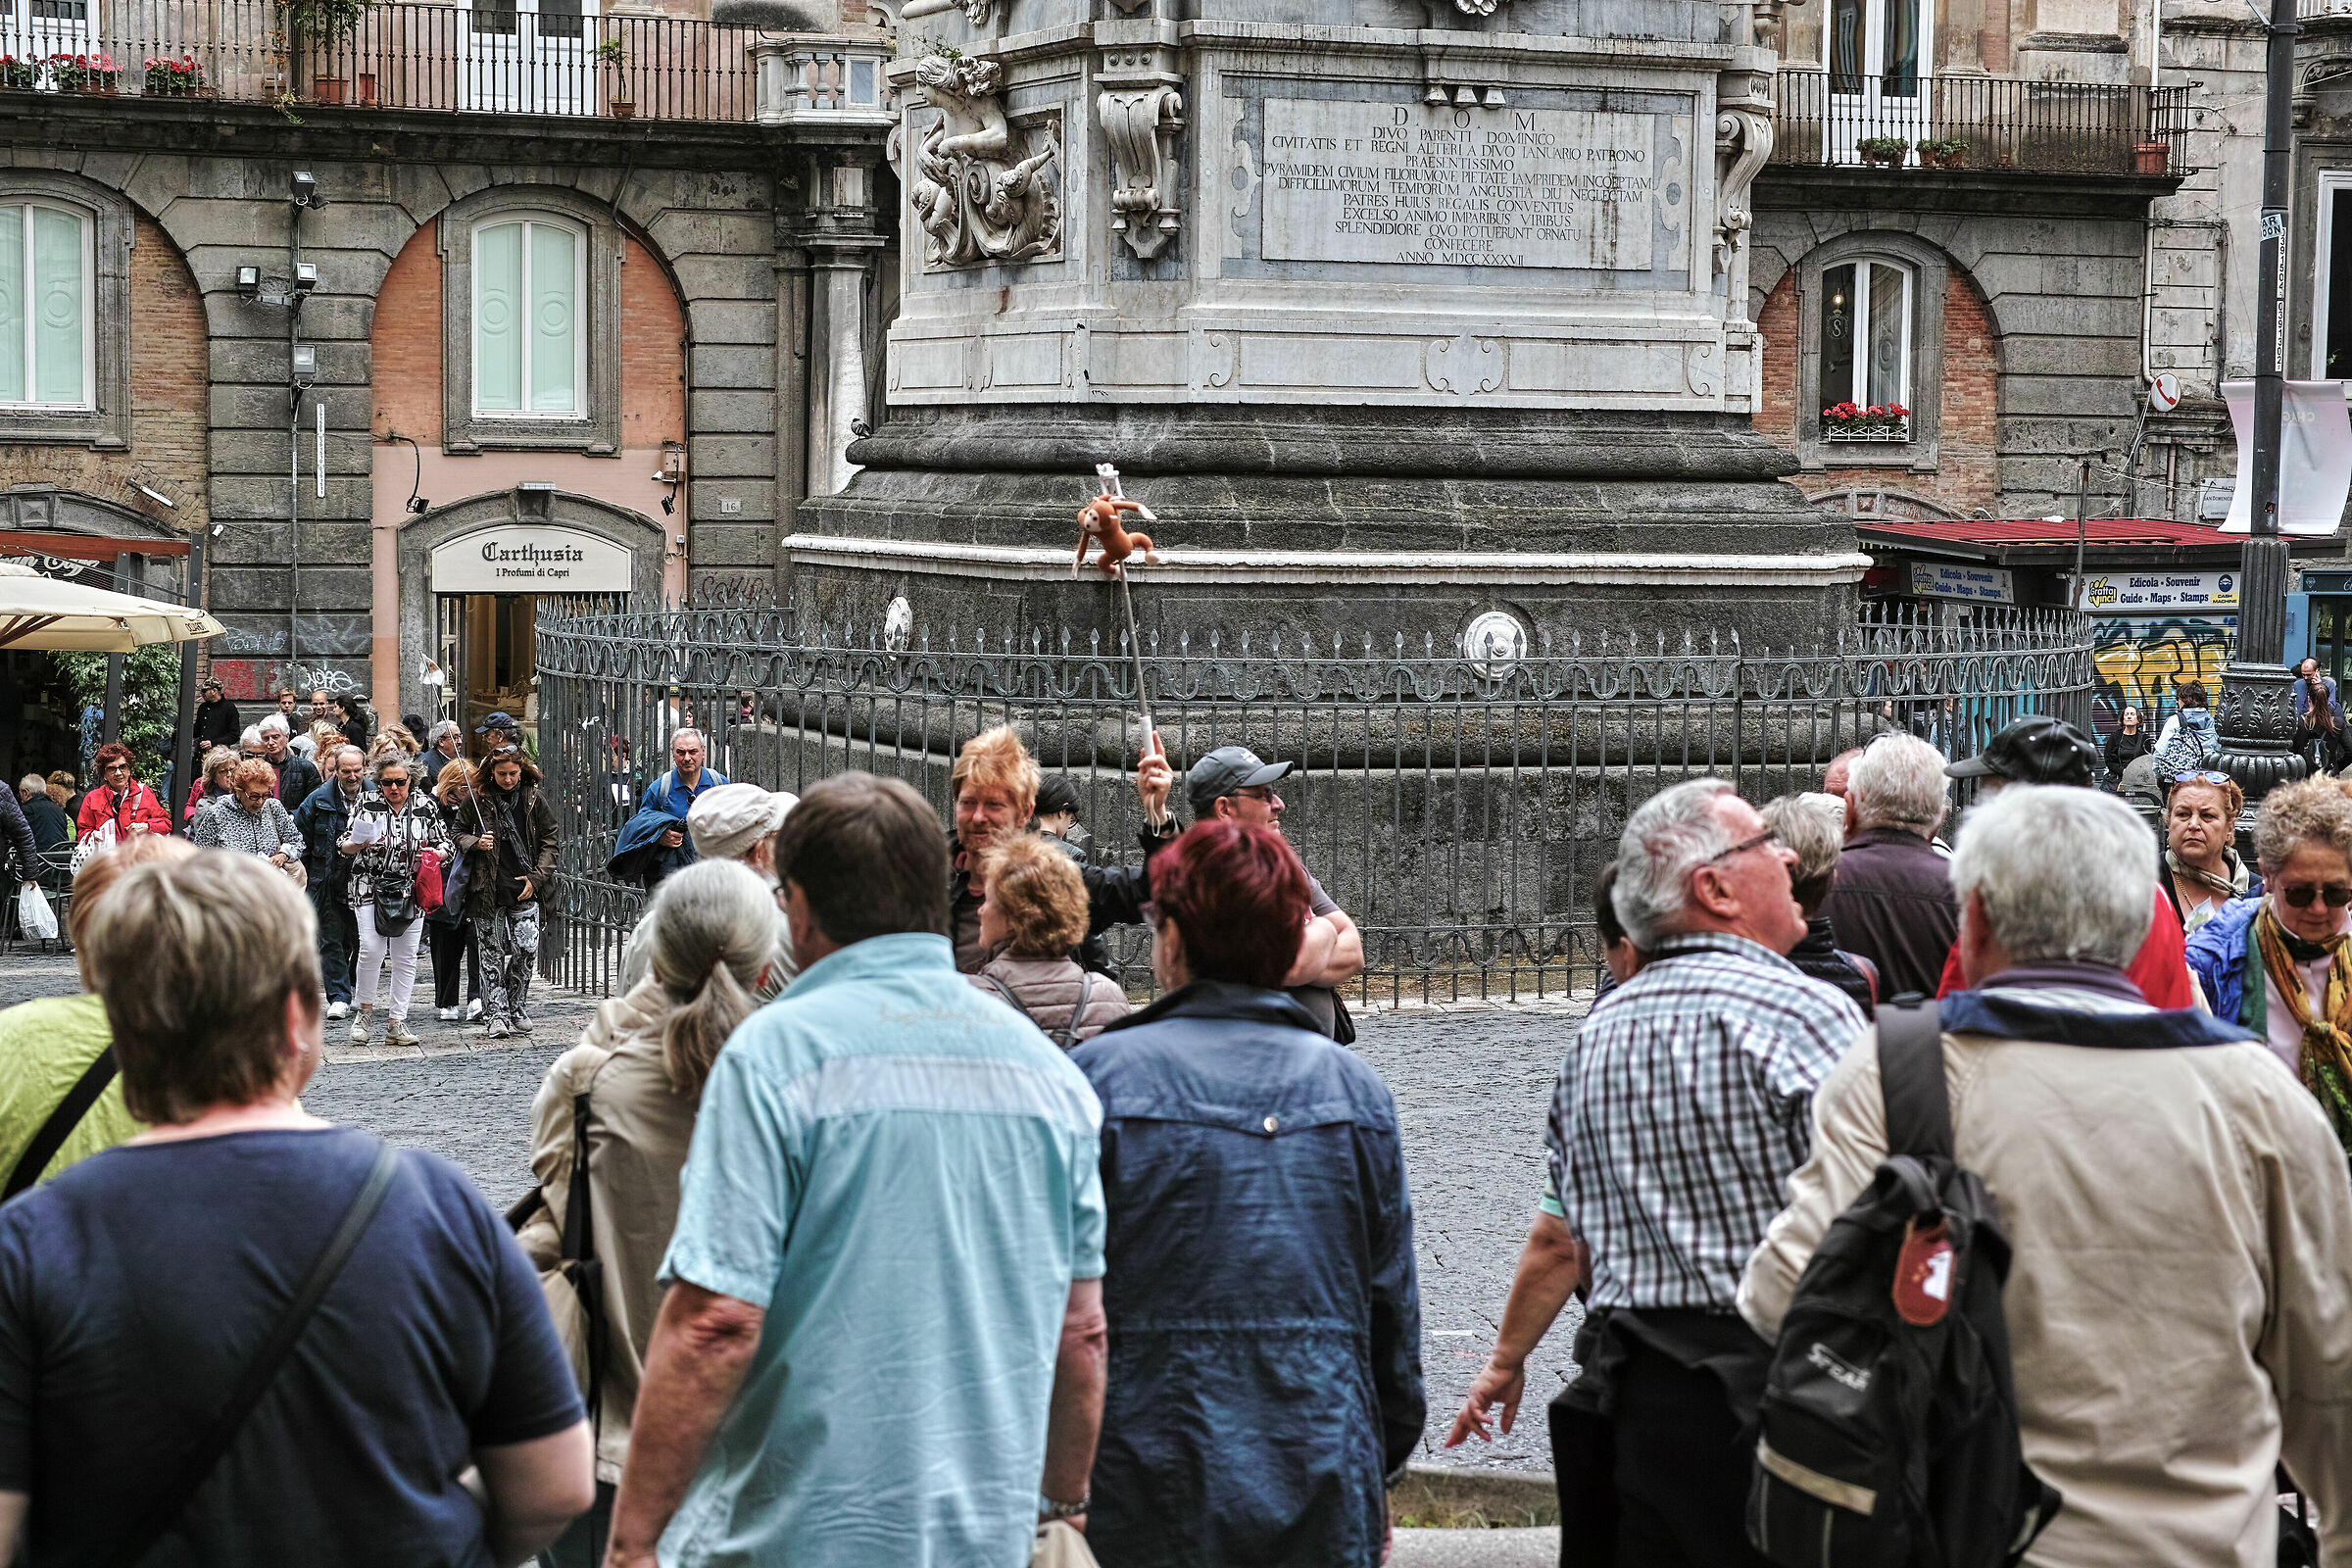 Naples - Occupation by tourists...